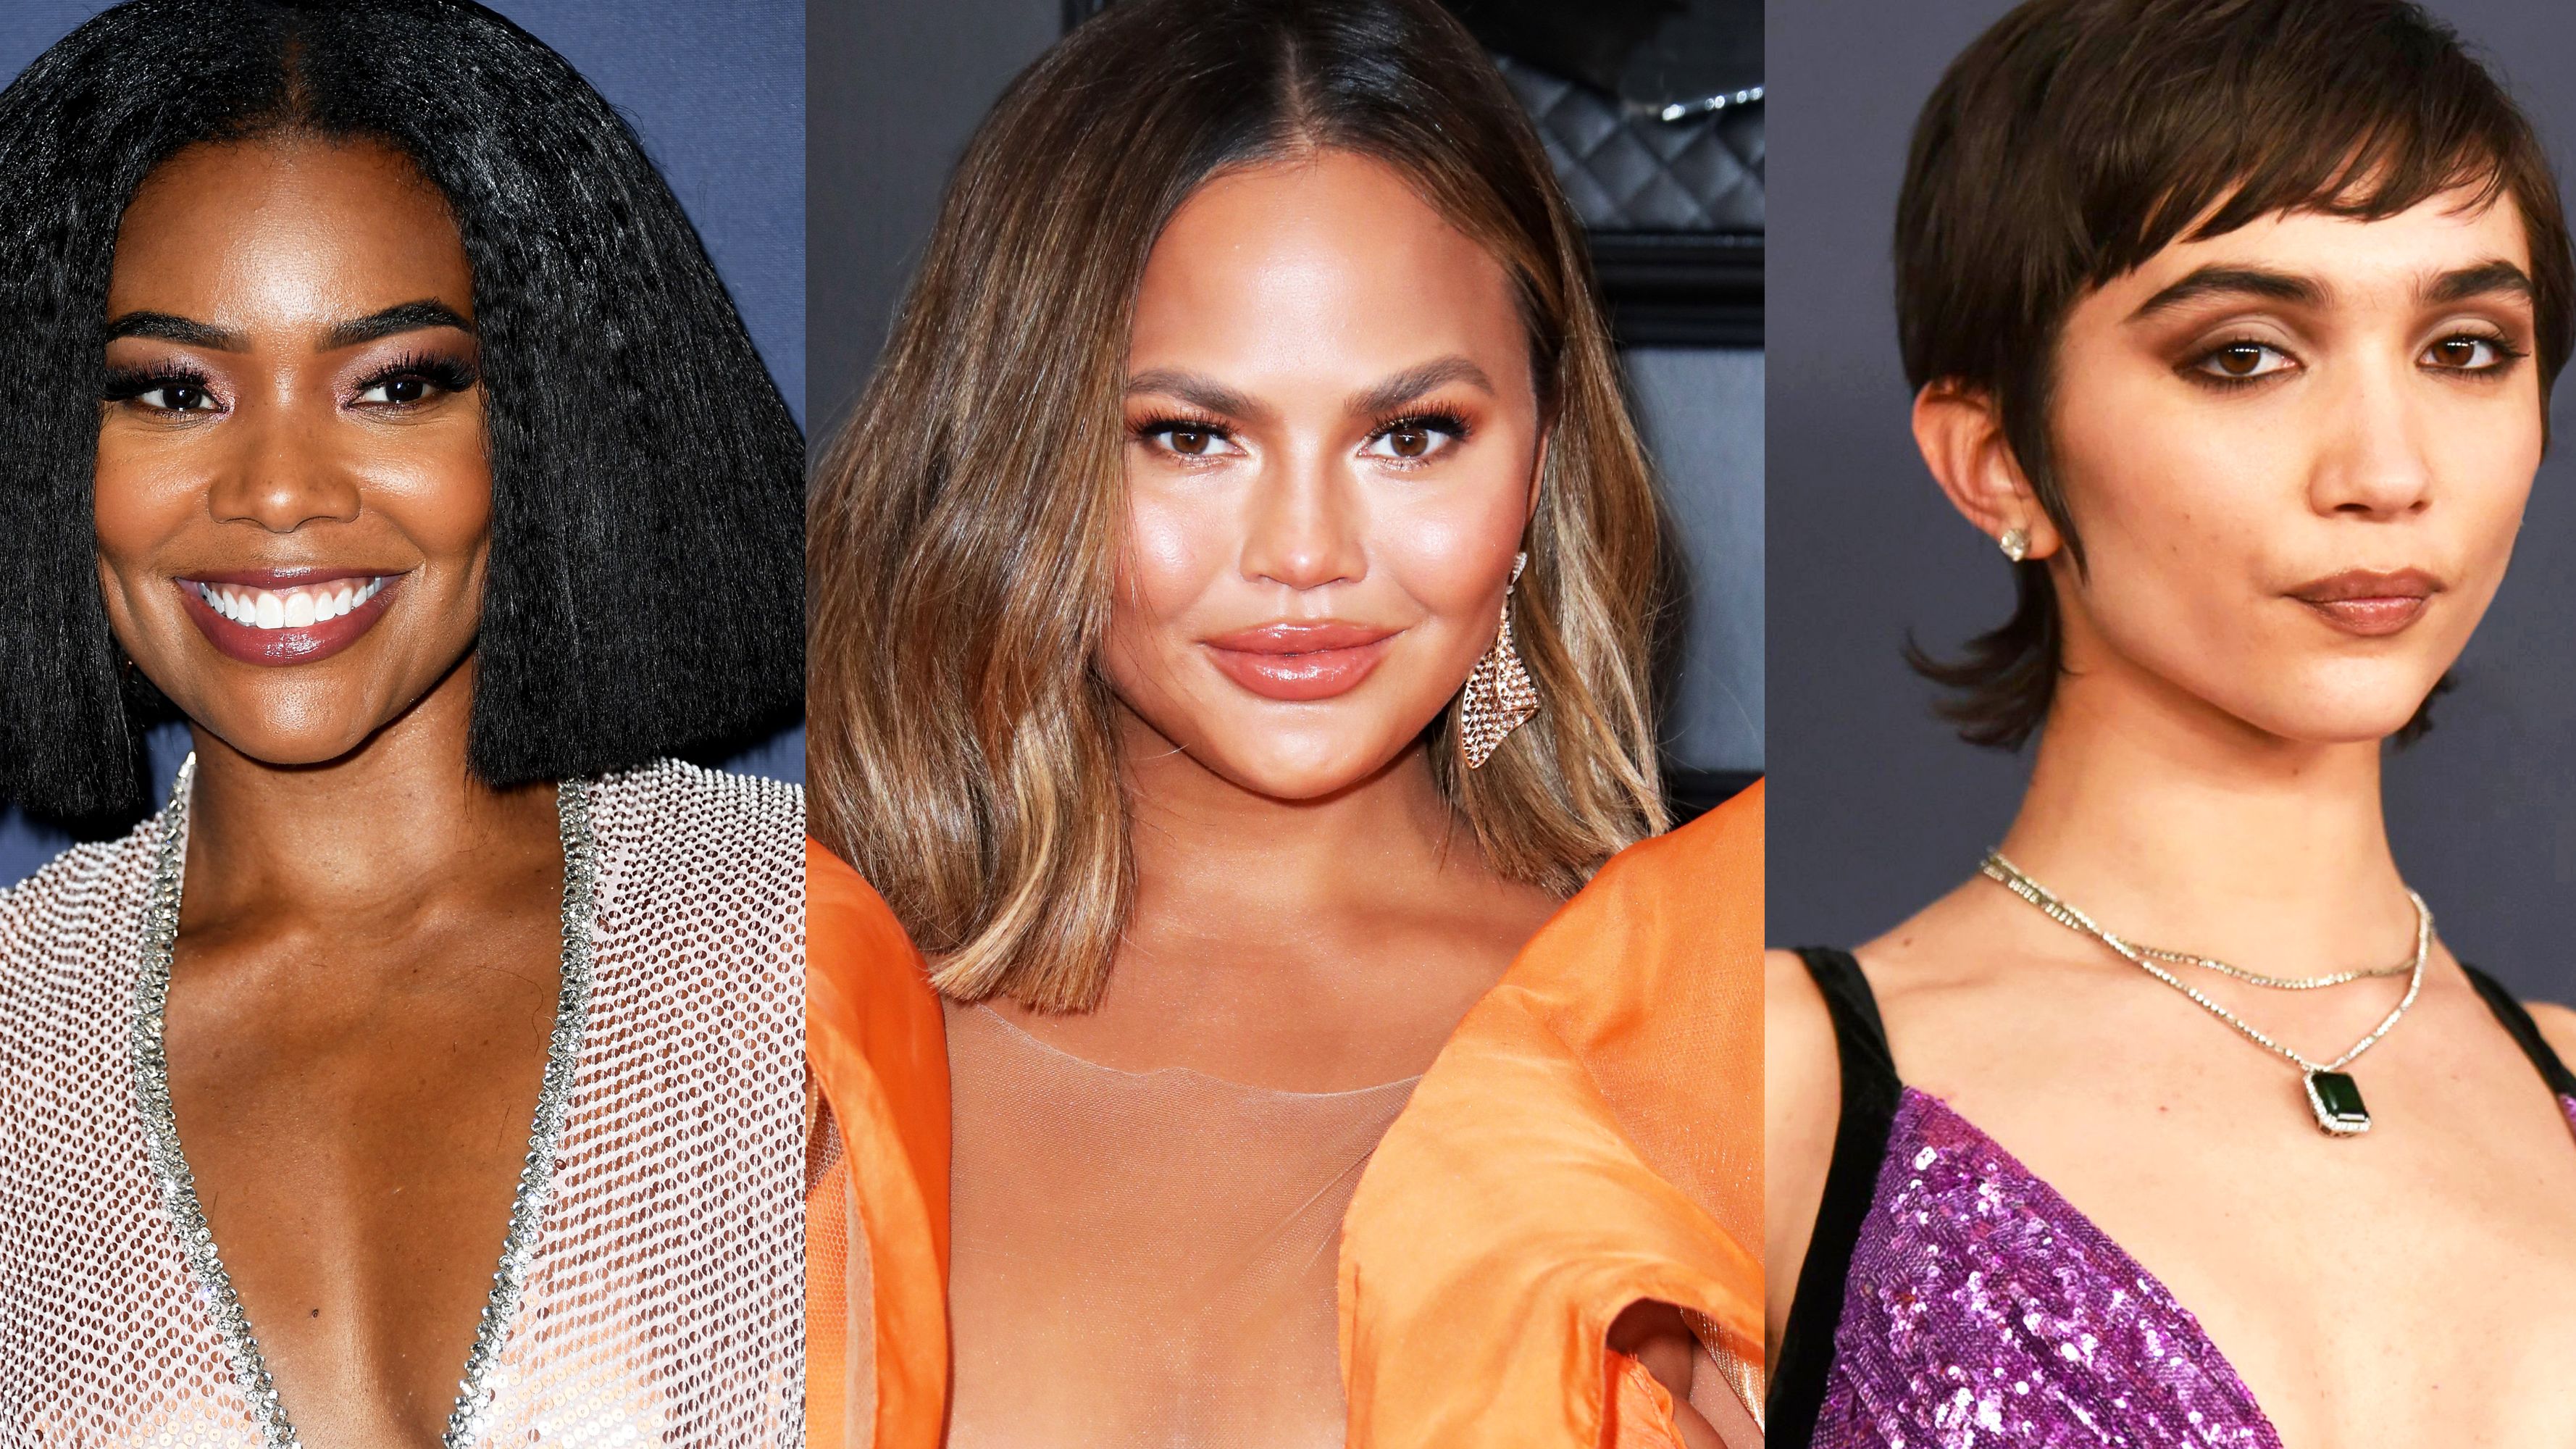 30 Chic Hairstyles for Oblong Face Shapes, According to Stylists